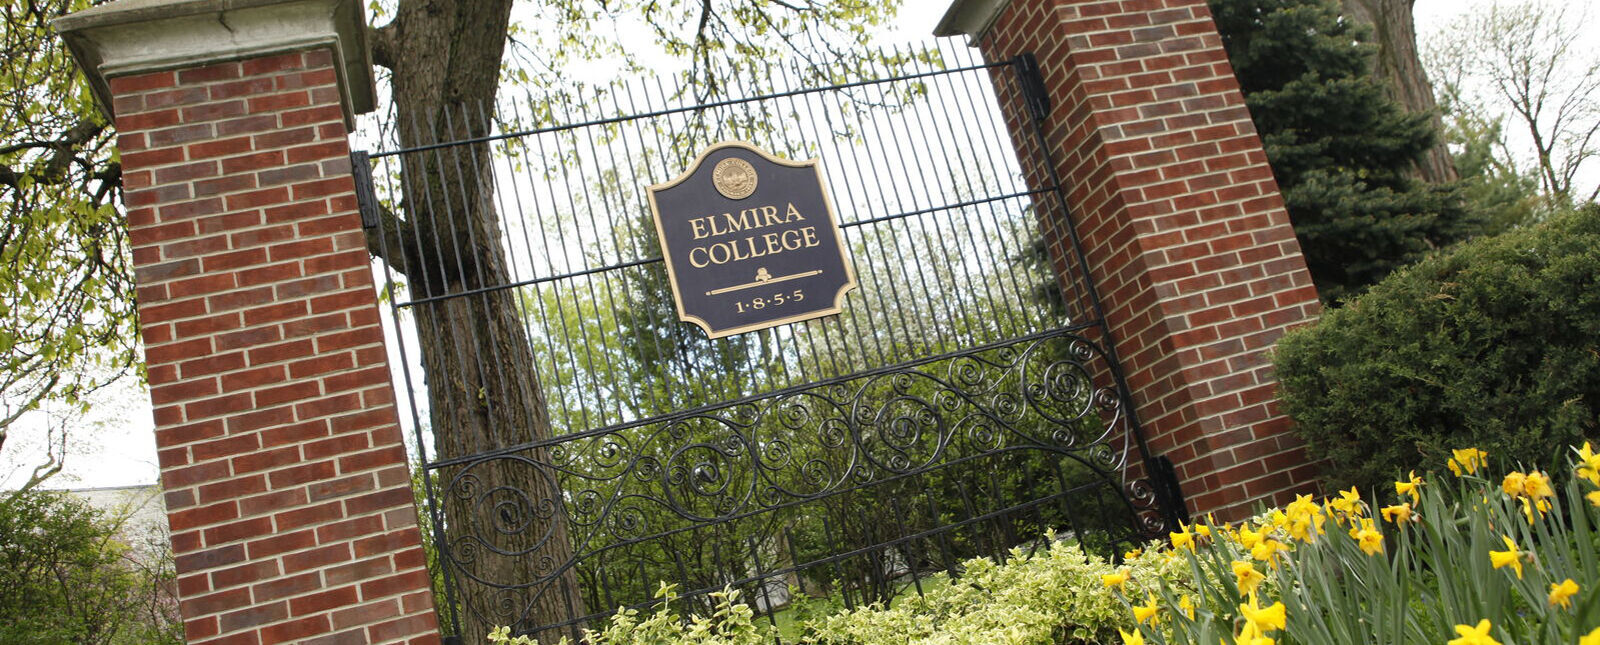 Yellow and white flowers grow in front of a gate bearing an Elmira College sign